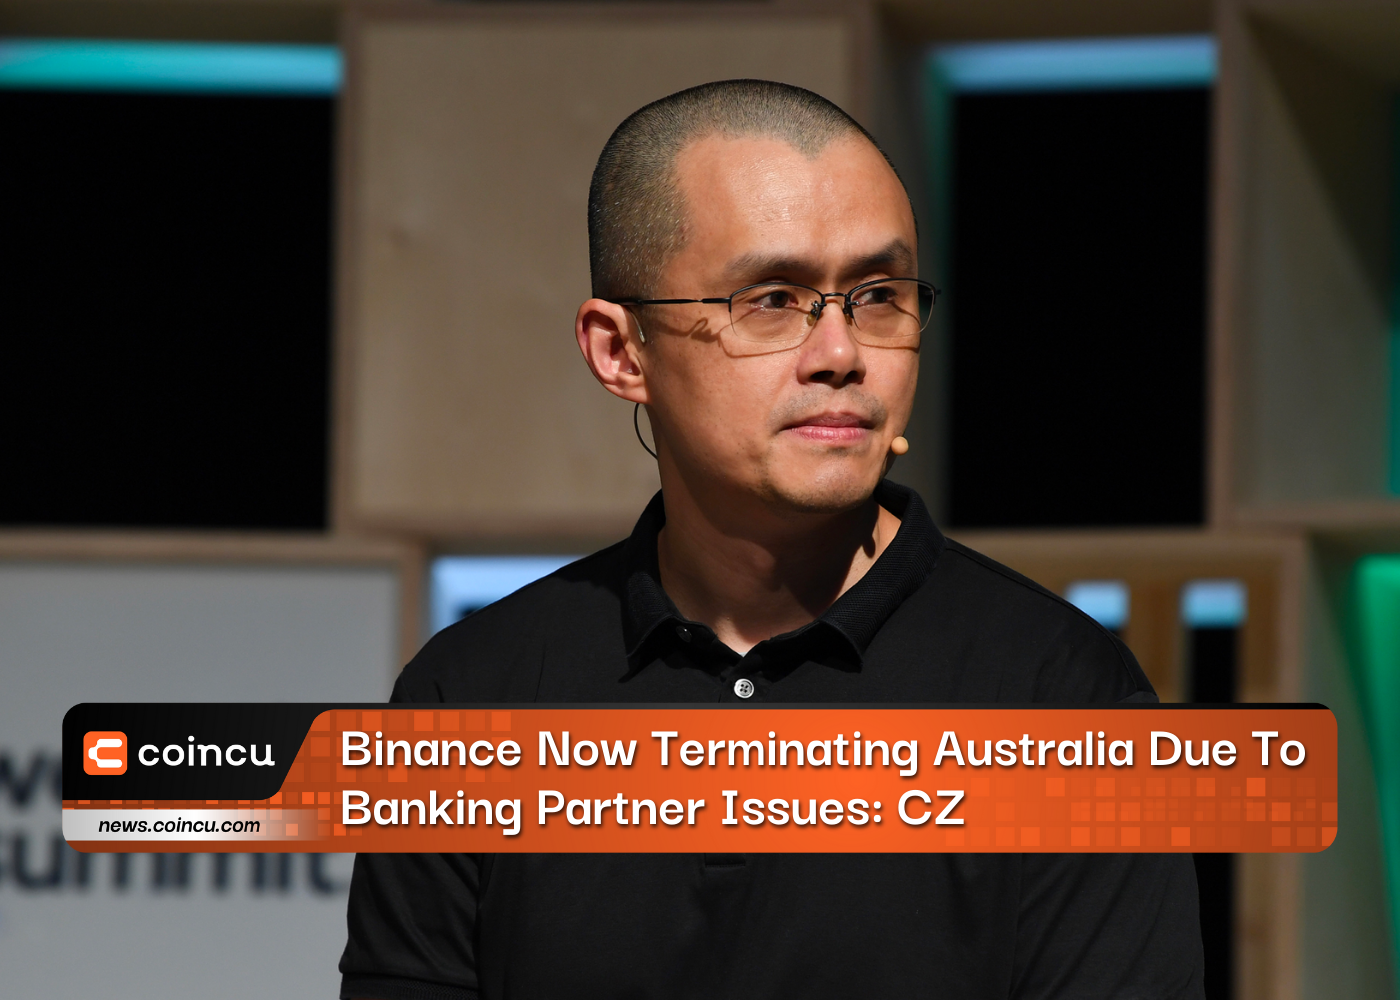 Binance Now Terminating Australia Due To Banking Partner Issues: CZ